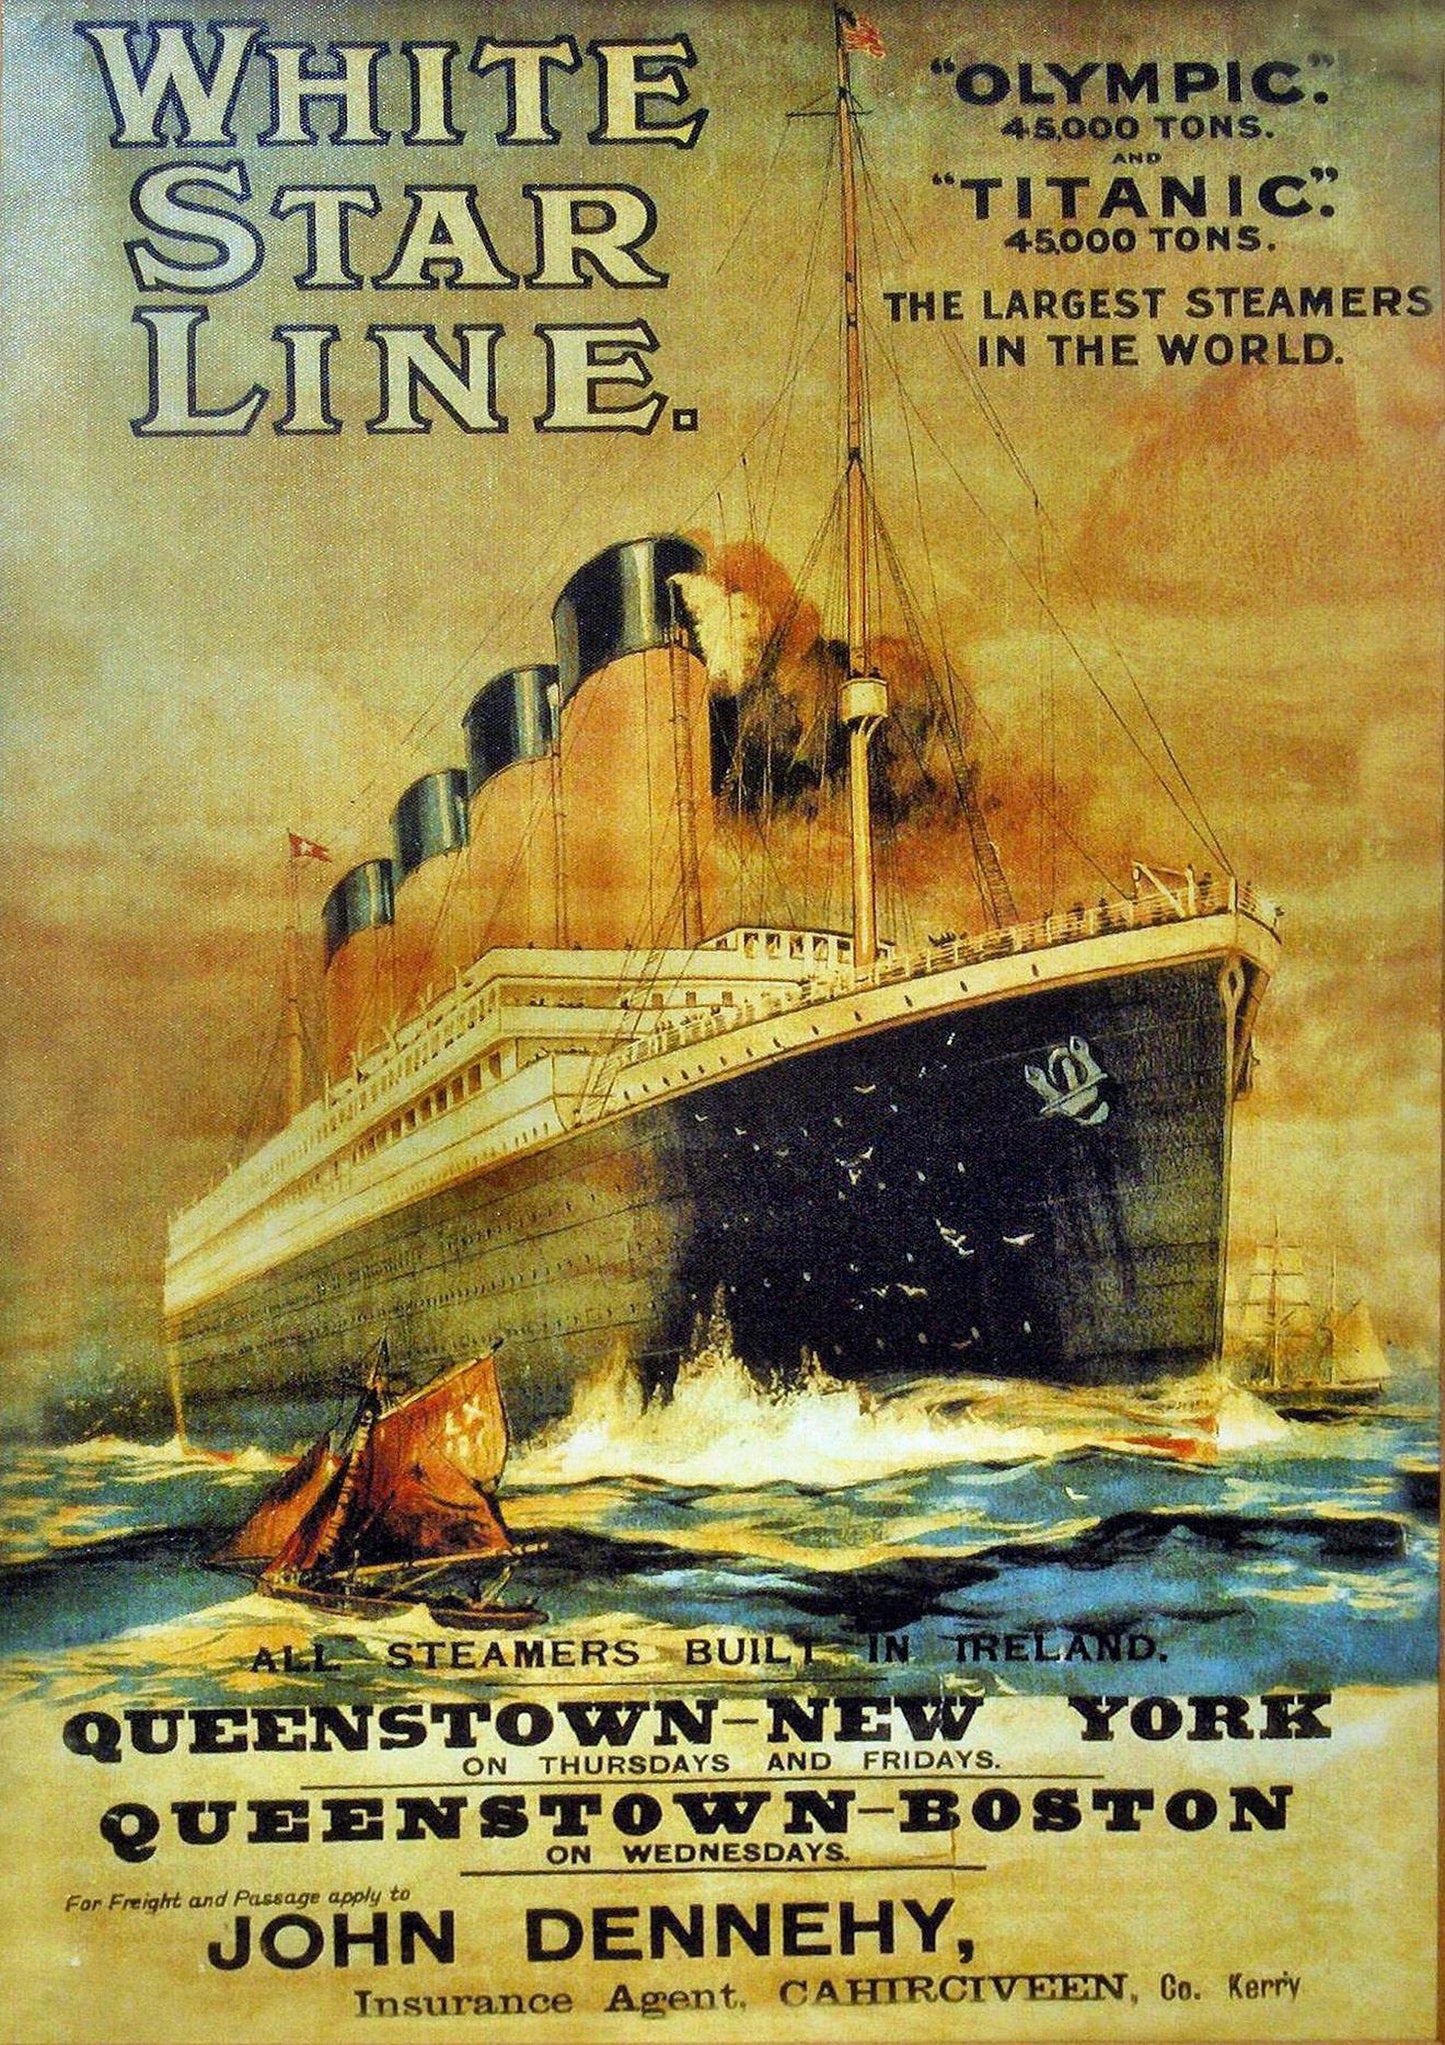 White Star Line poster art print for “Olympic” & “Titanic” Ships (1)(1910)  The Trumpet Shop   